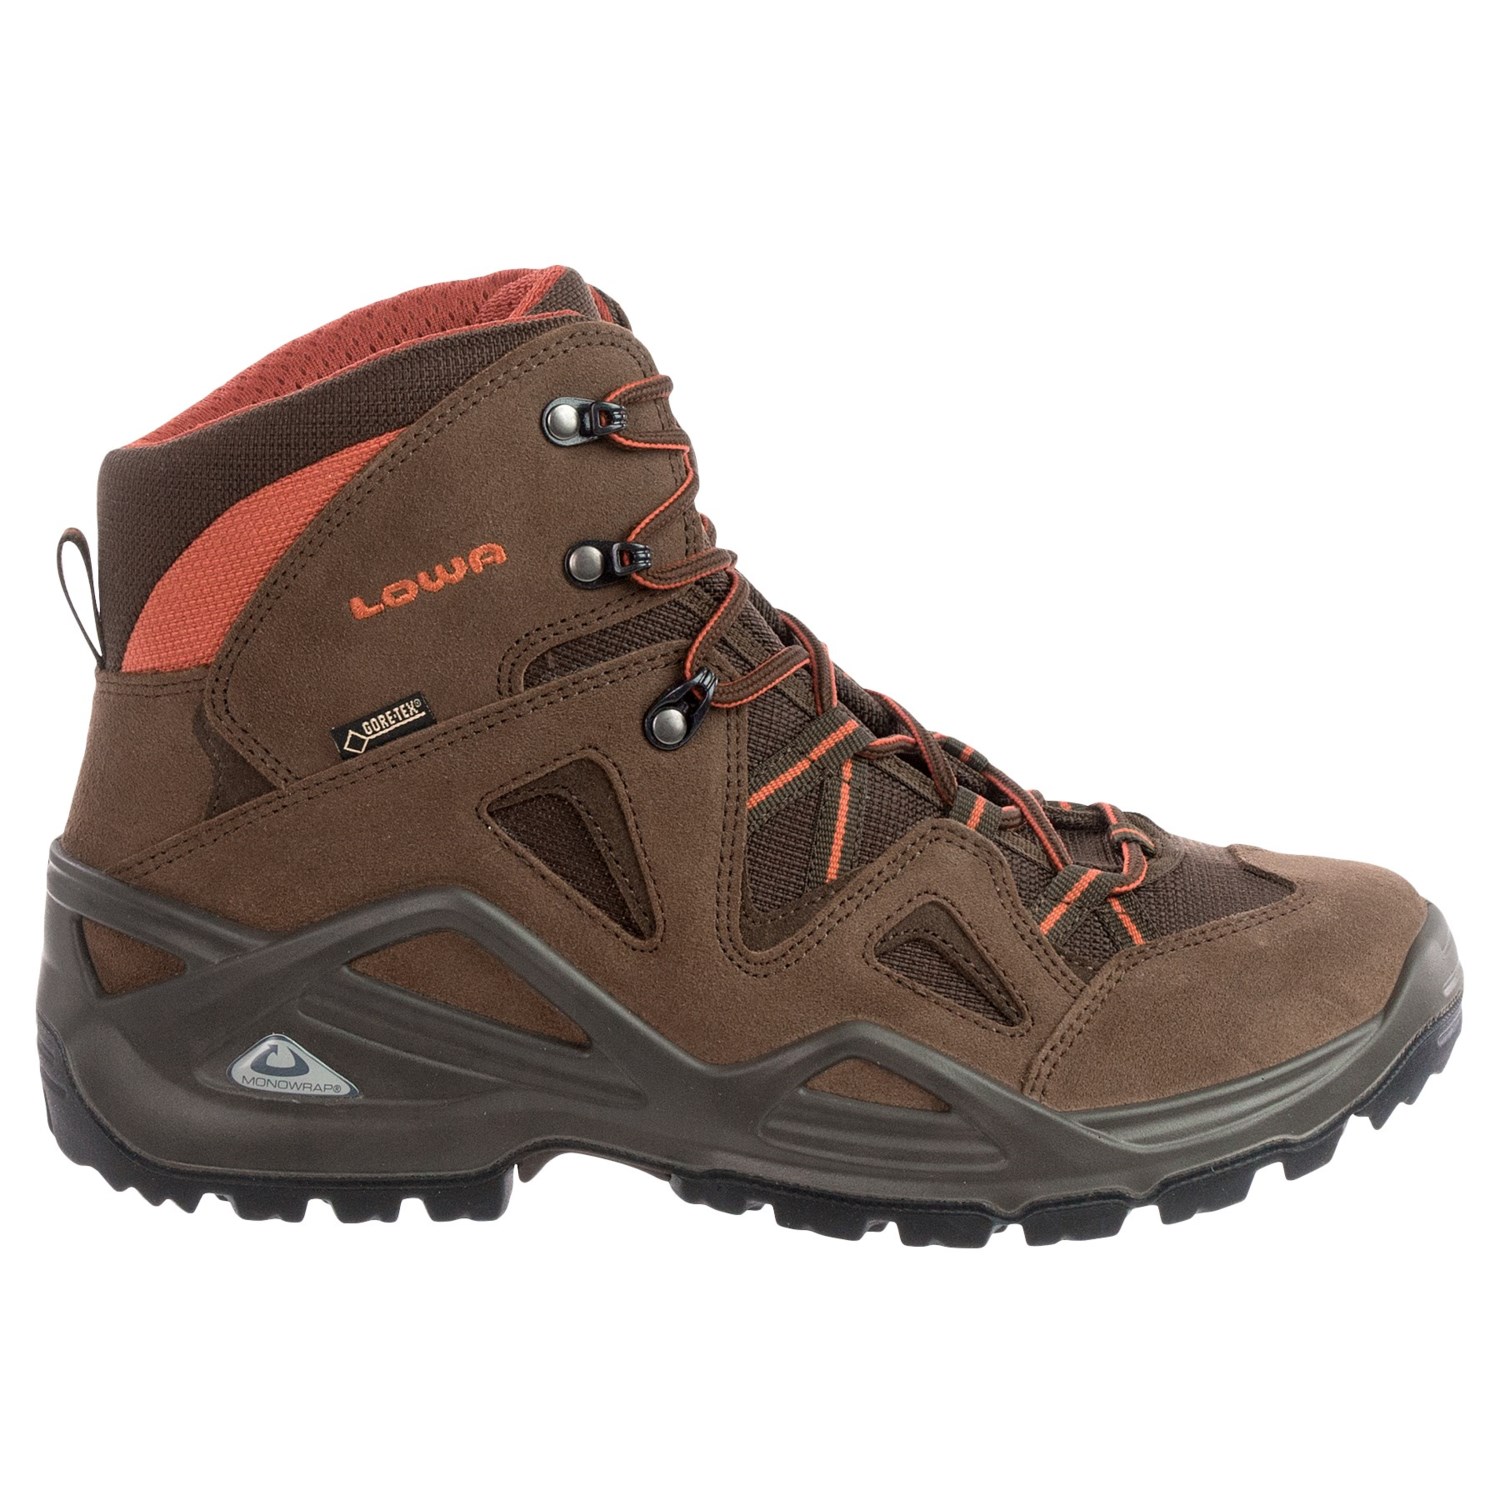 Lowa Zephyr Gore-Tex® Mid Hiking Boots (For Men) - Save 38%